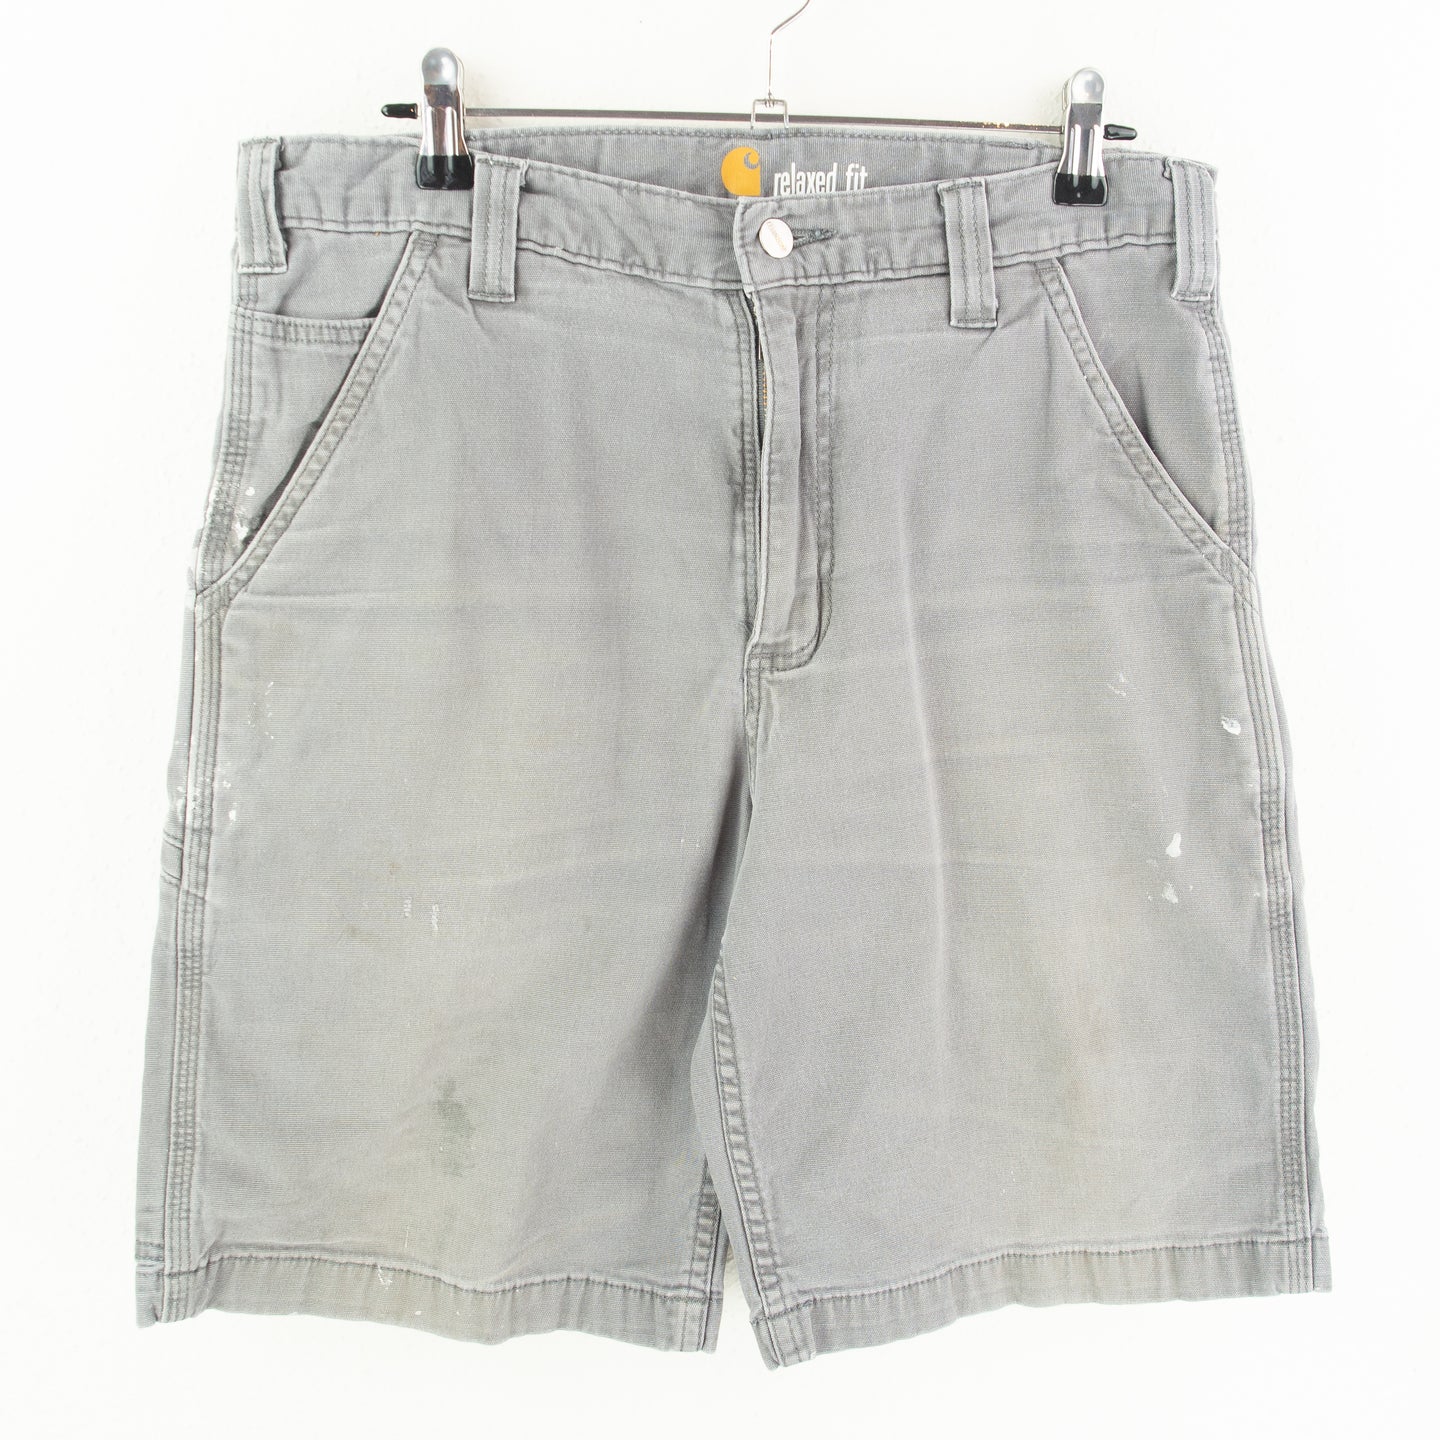 VINTAGE CARHARTT RELAXED FIT SHORTS - 32'